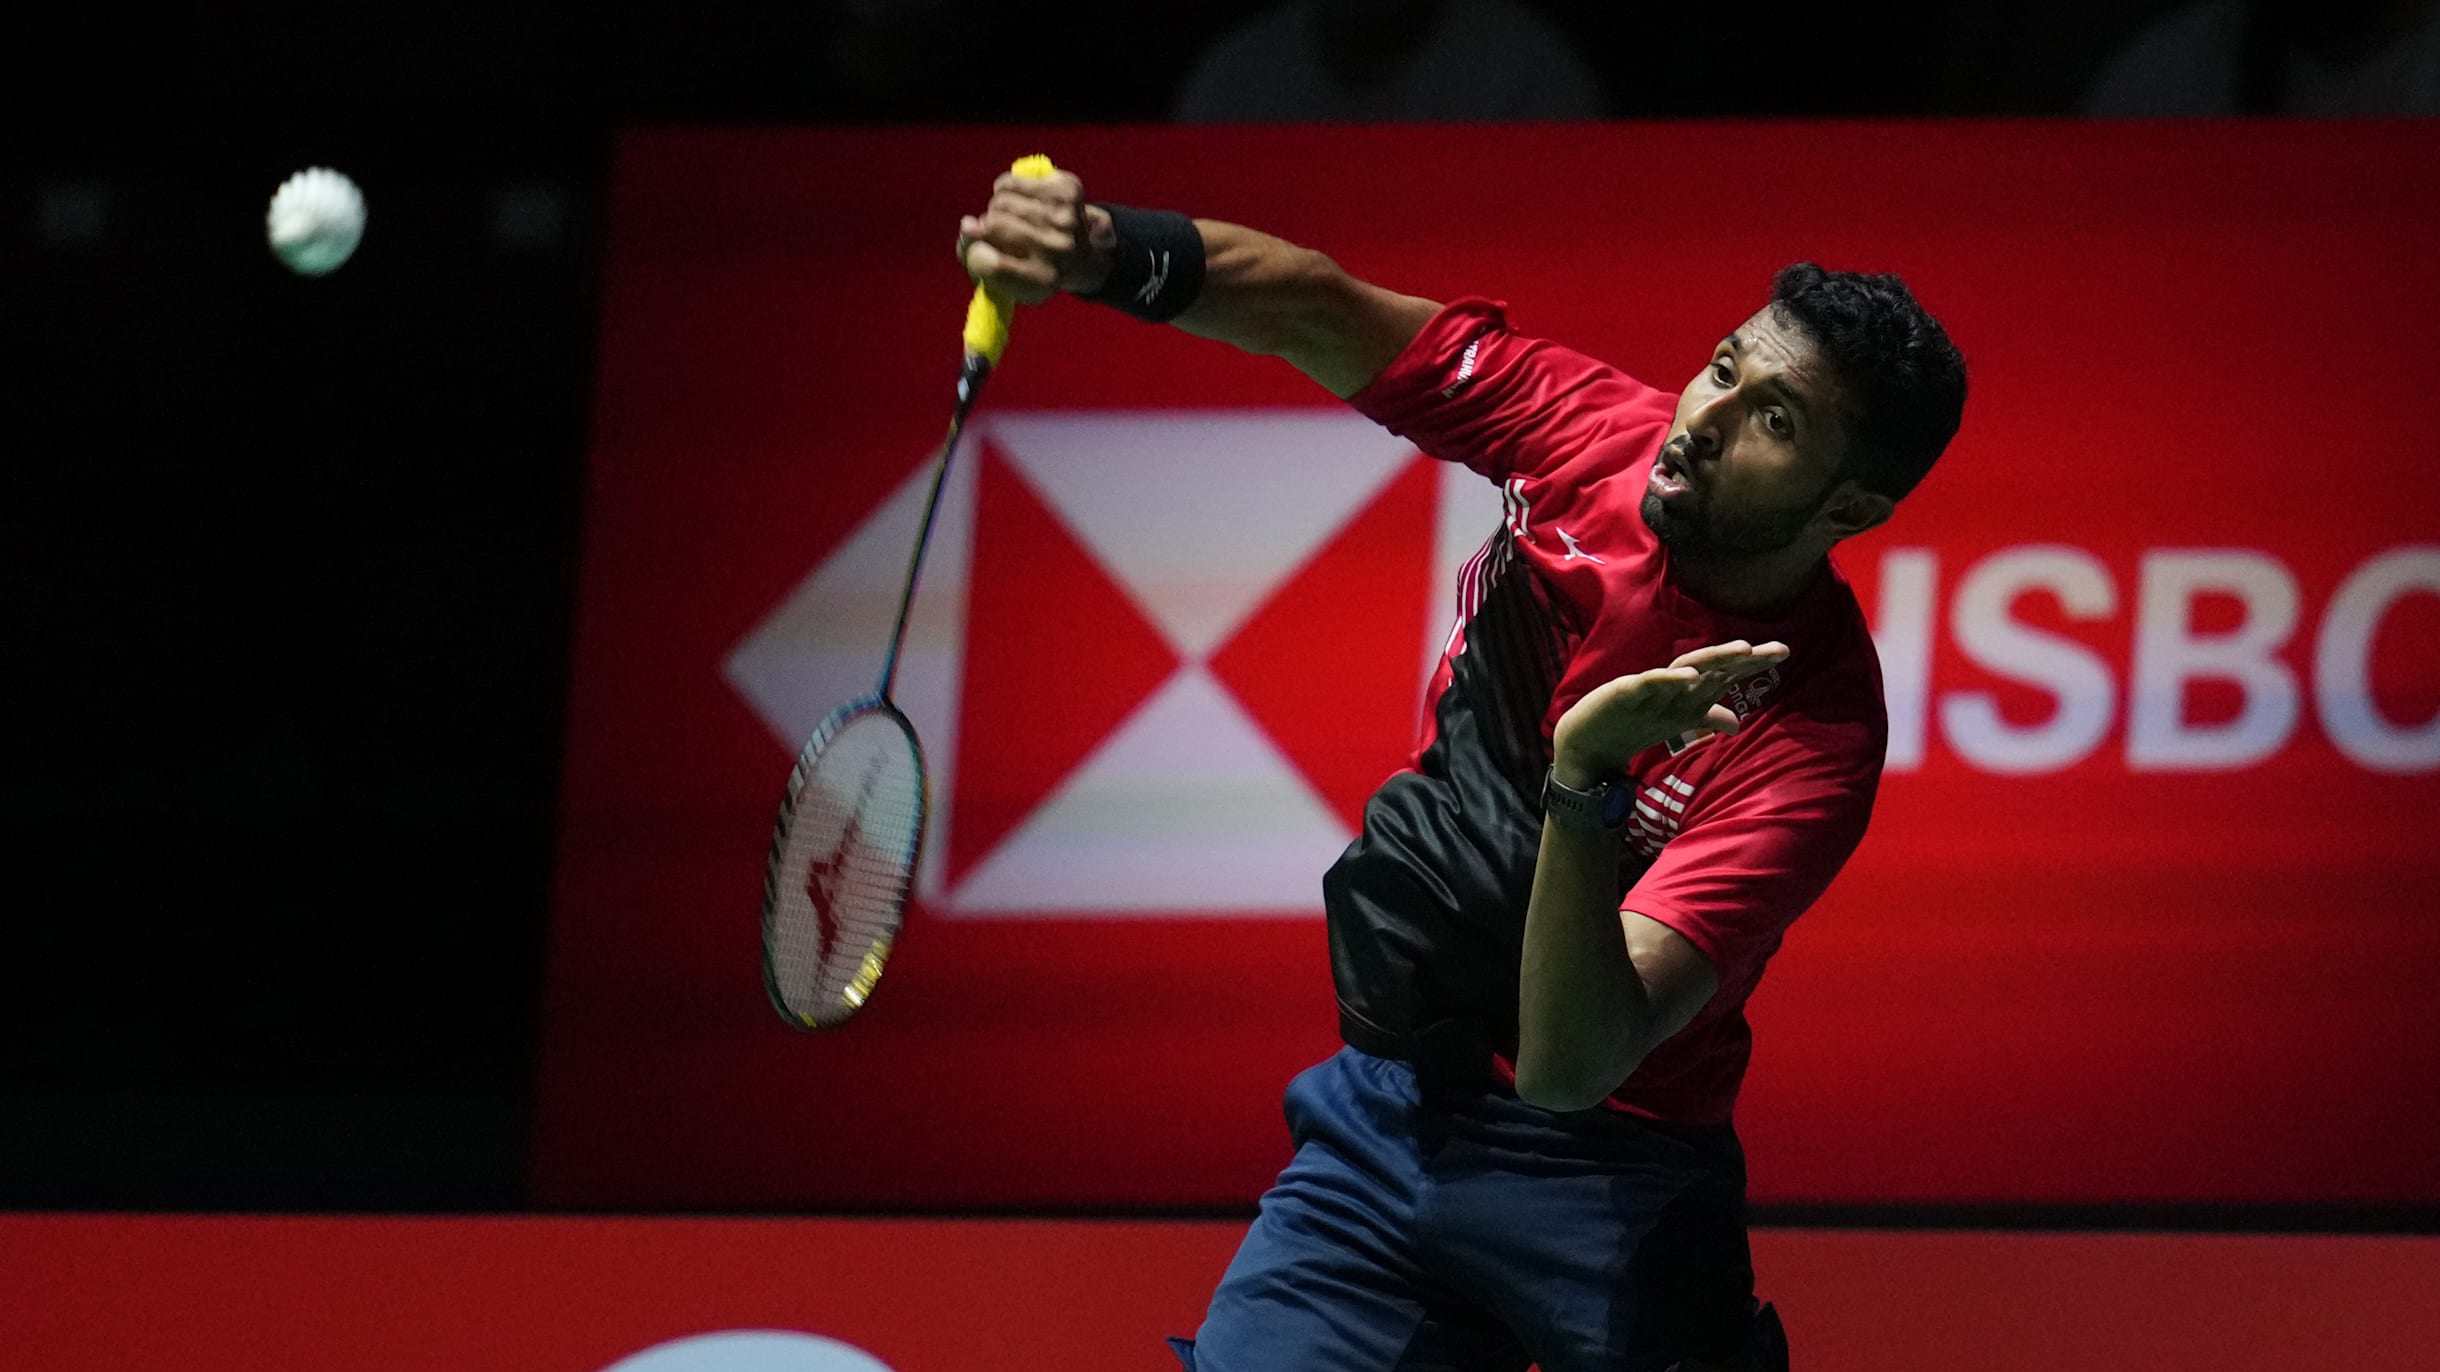 BWF World Tour Finals 2022 HS Prannoy lone Indian, watch live streaming and telecast in India